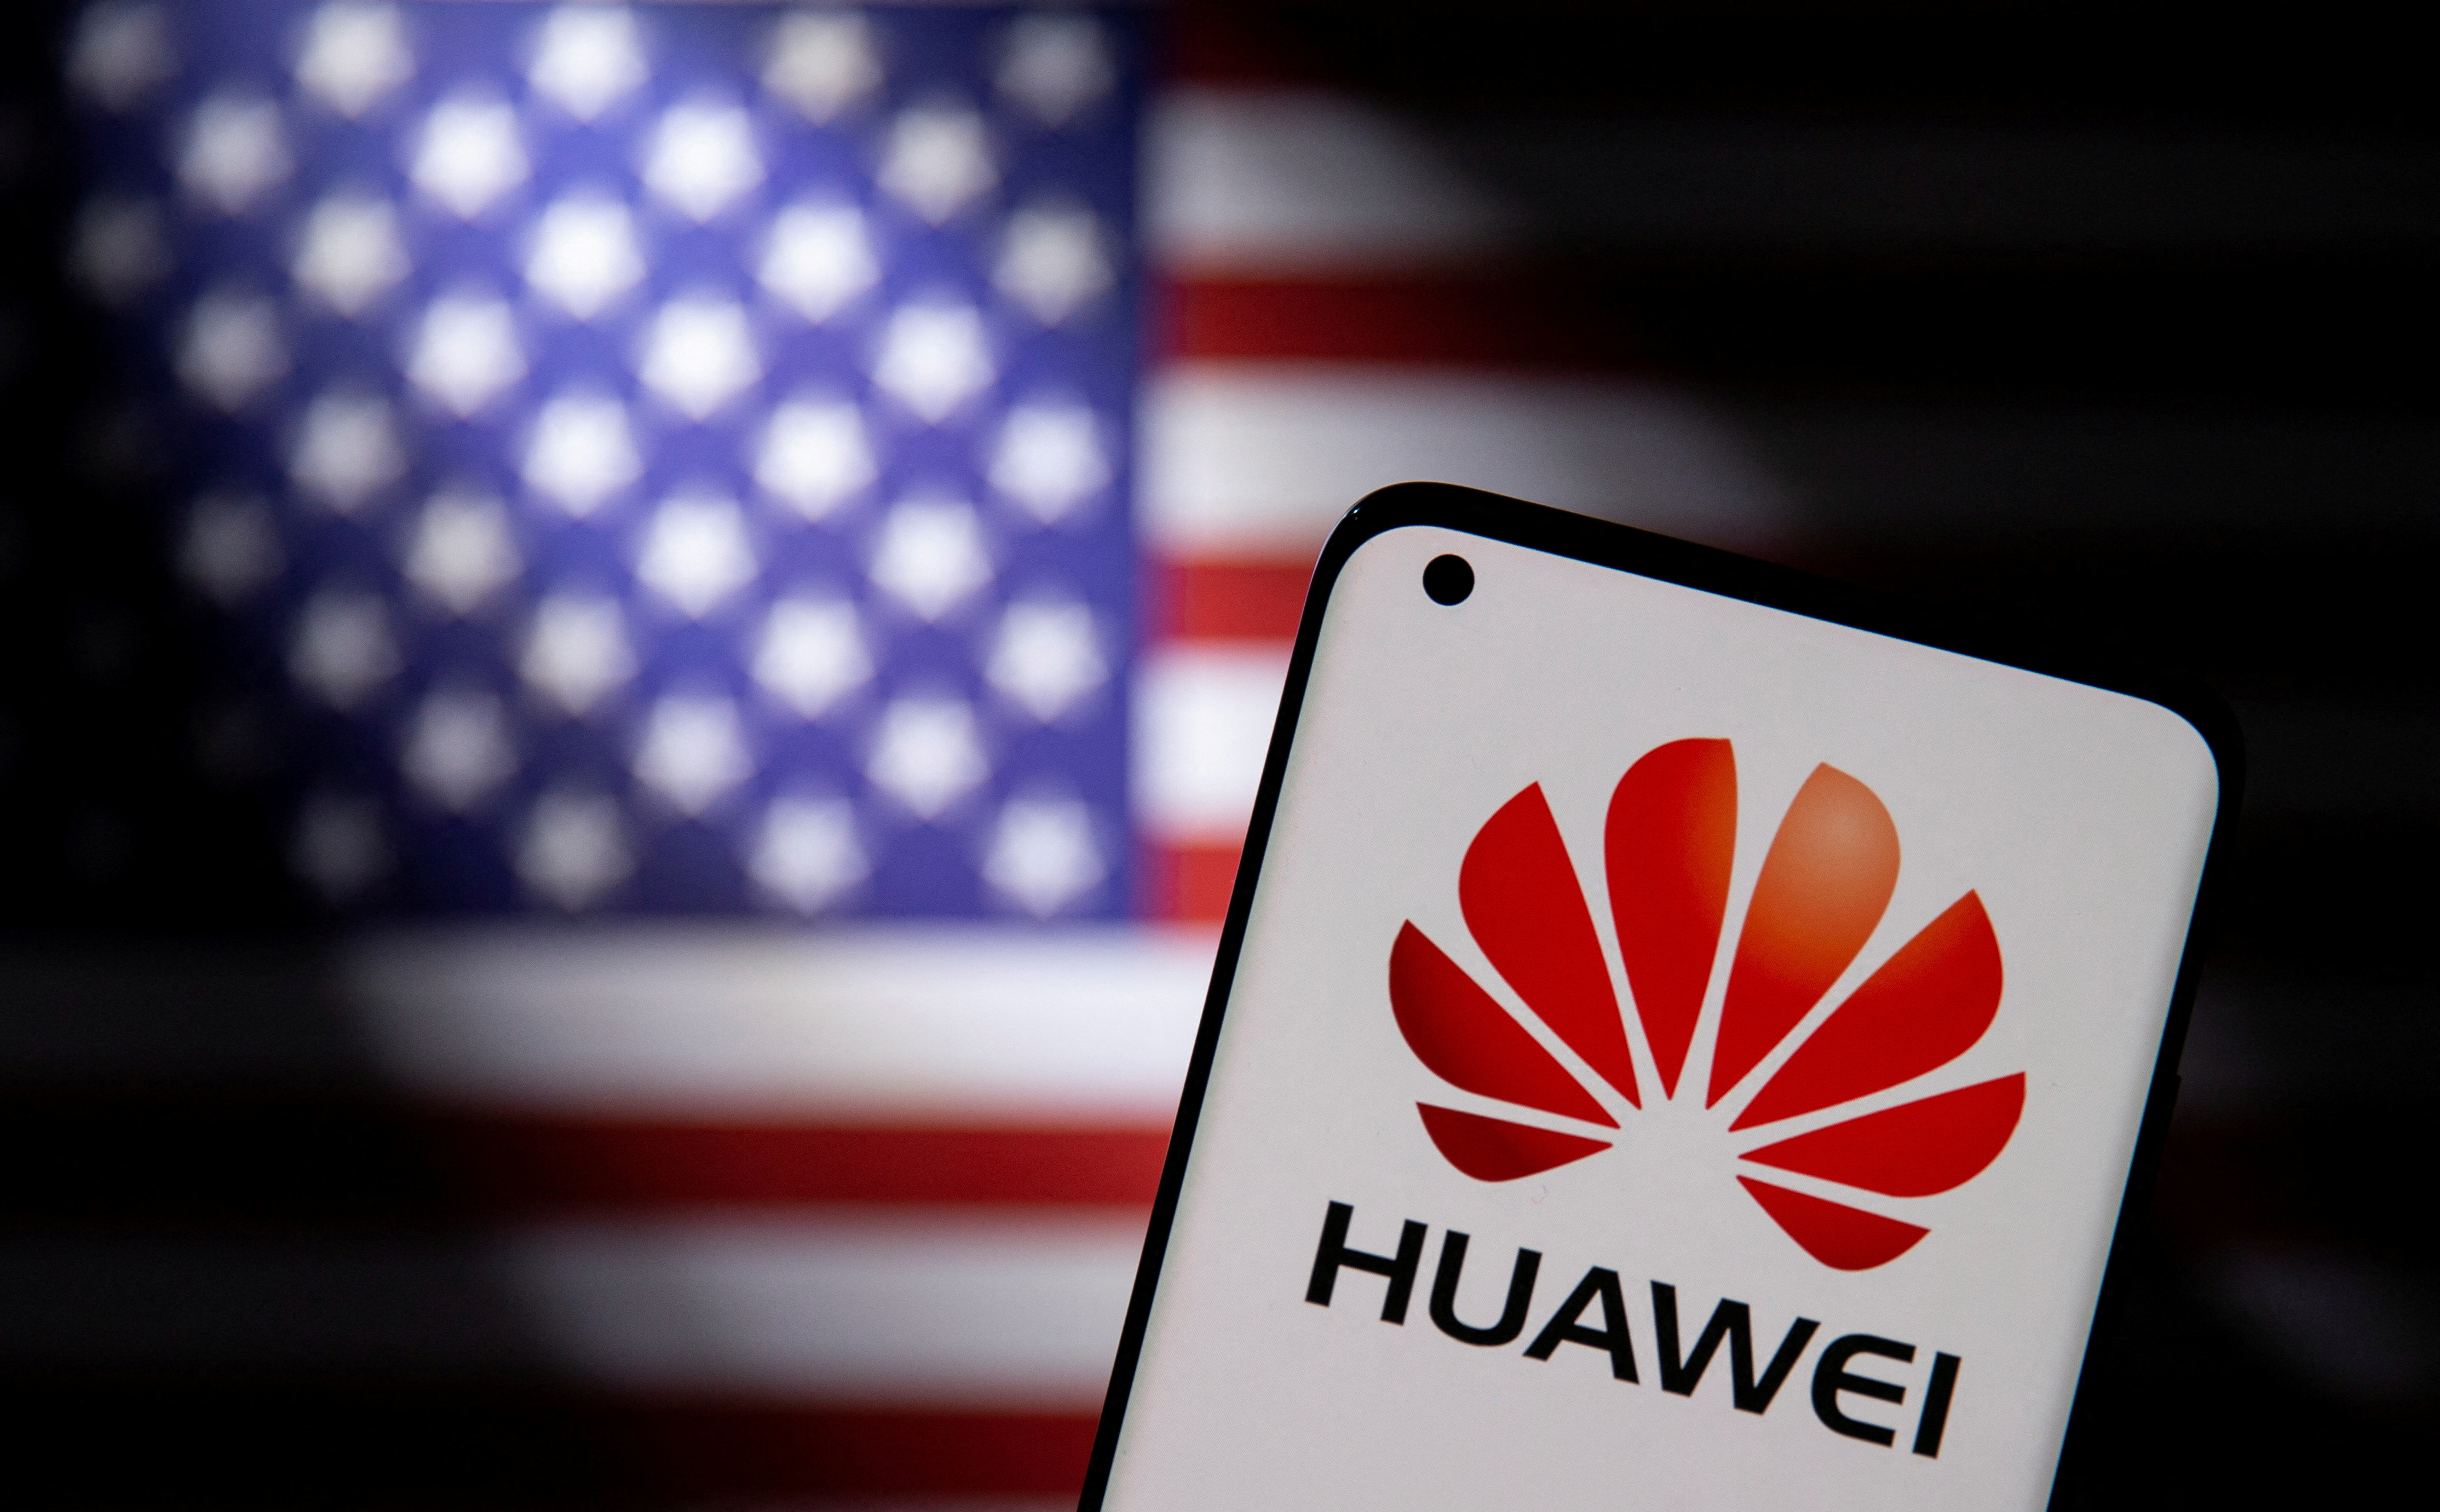 U.S. probes China's Huawei over near silos | Reuters